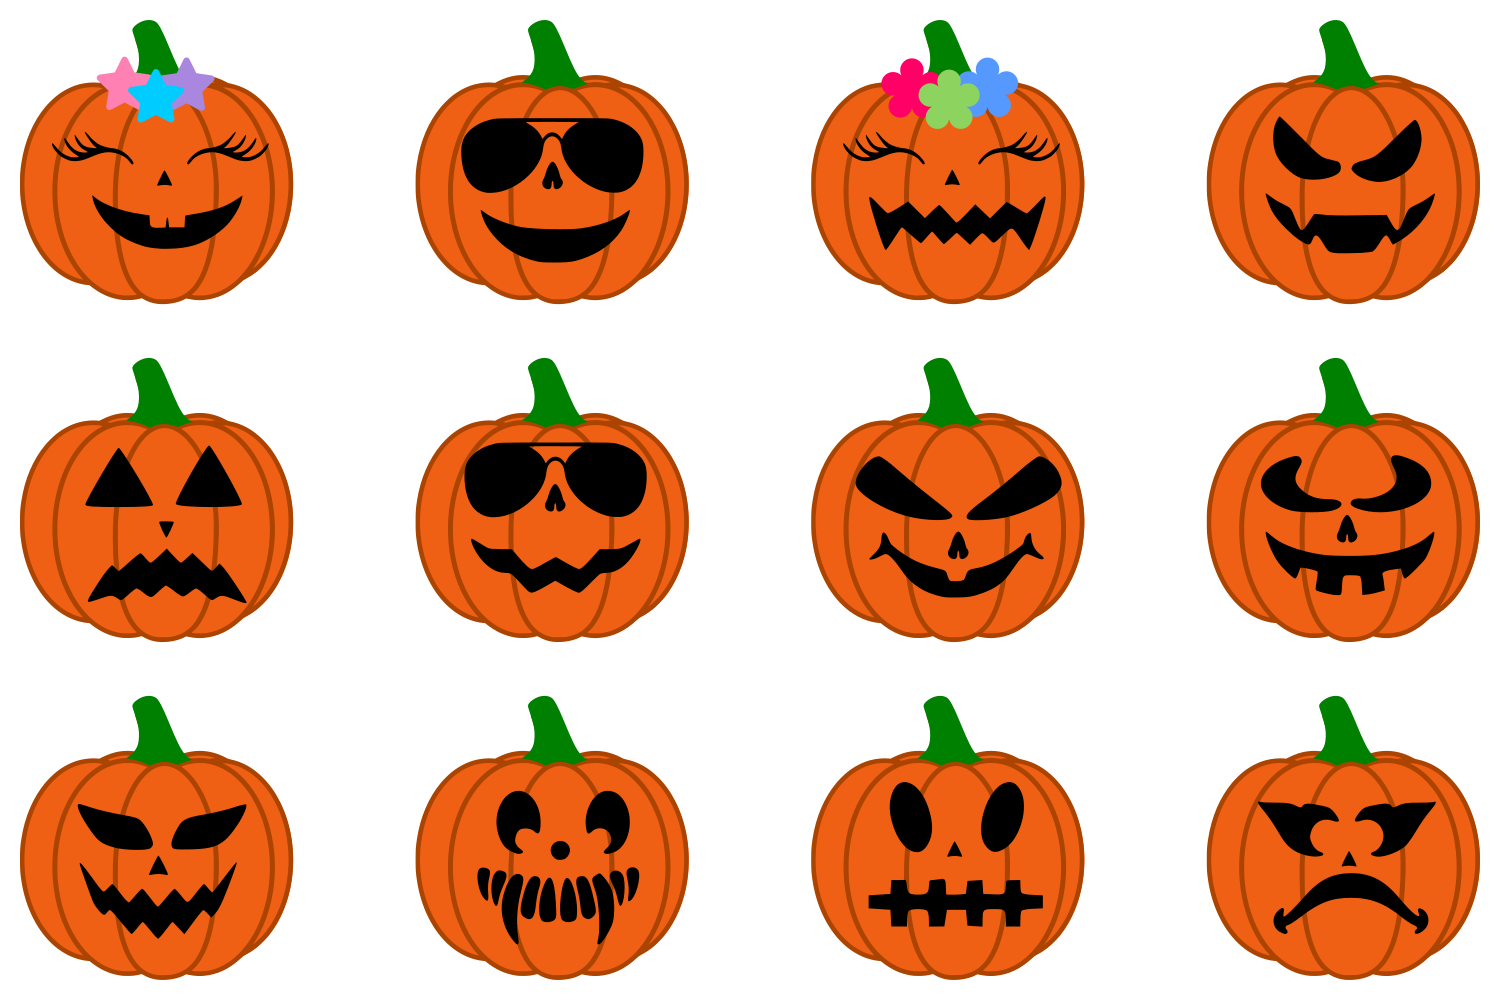 Halloween SVG Pumpkin SVG Halloween Pumpkin SVG DXF PNG EPS